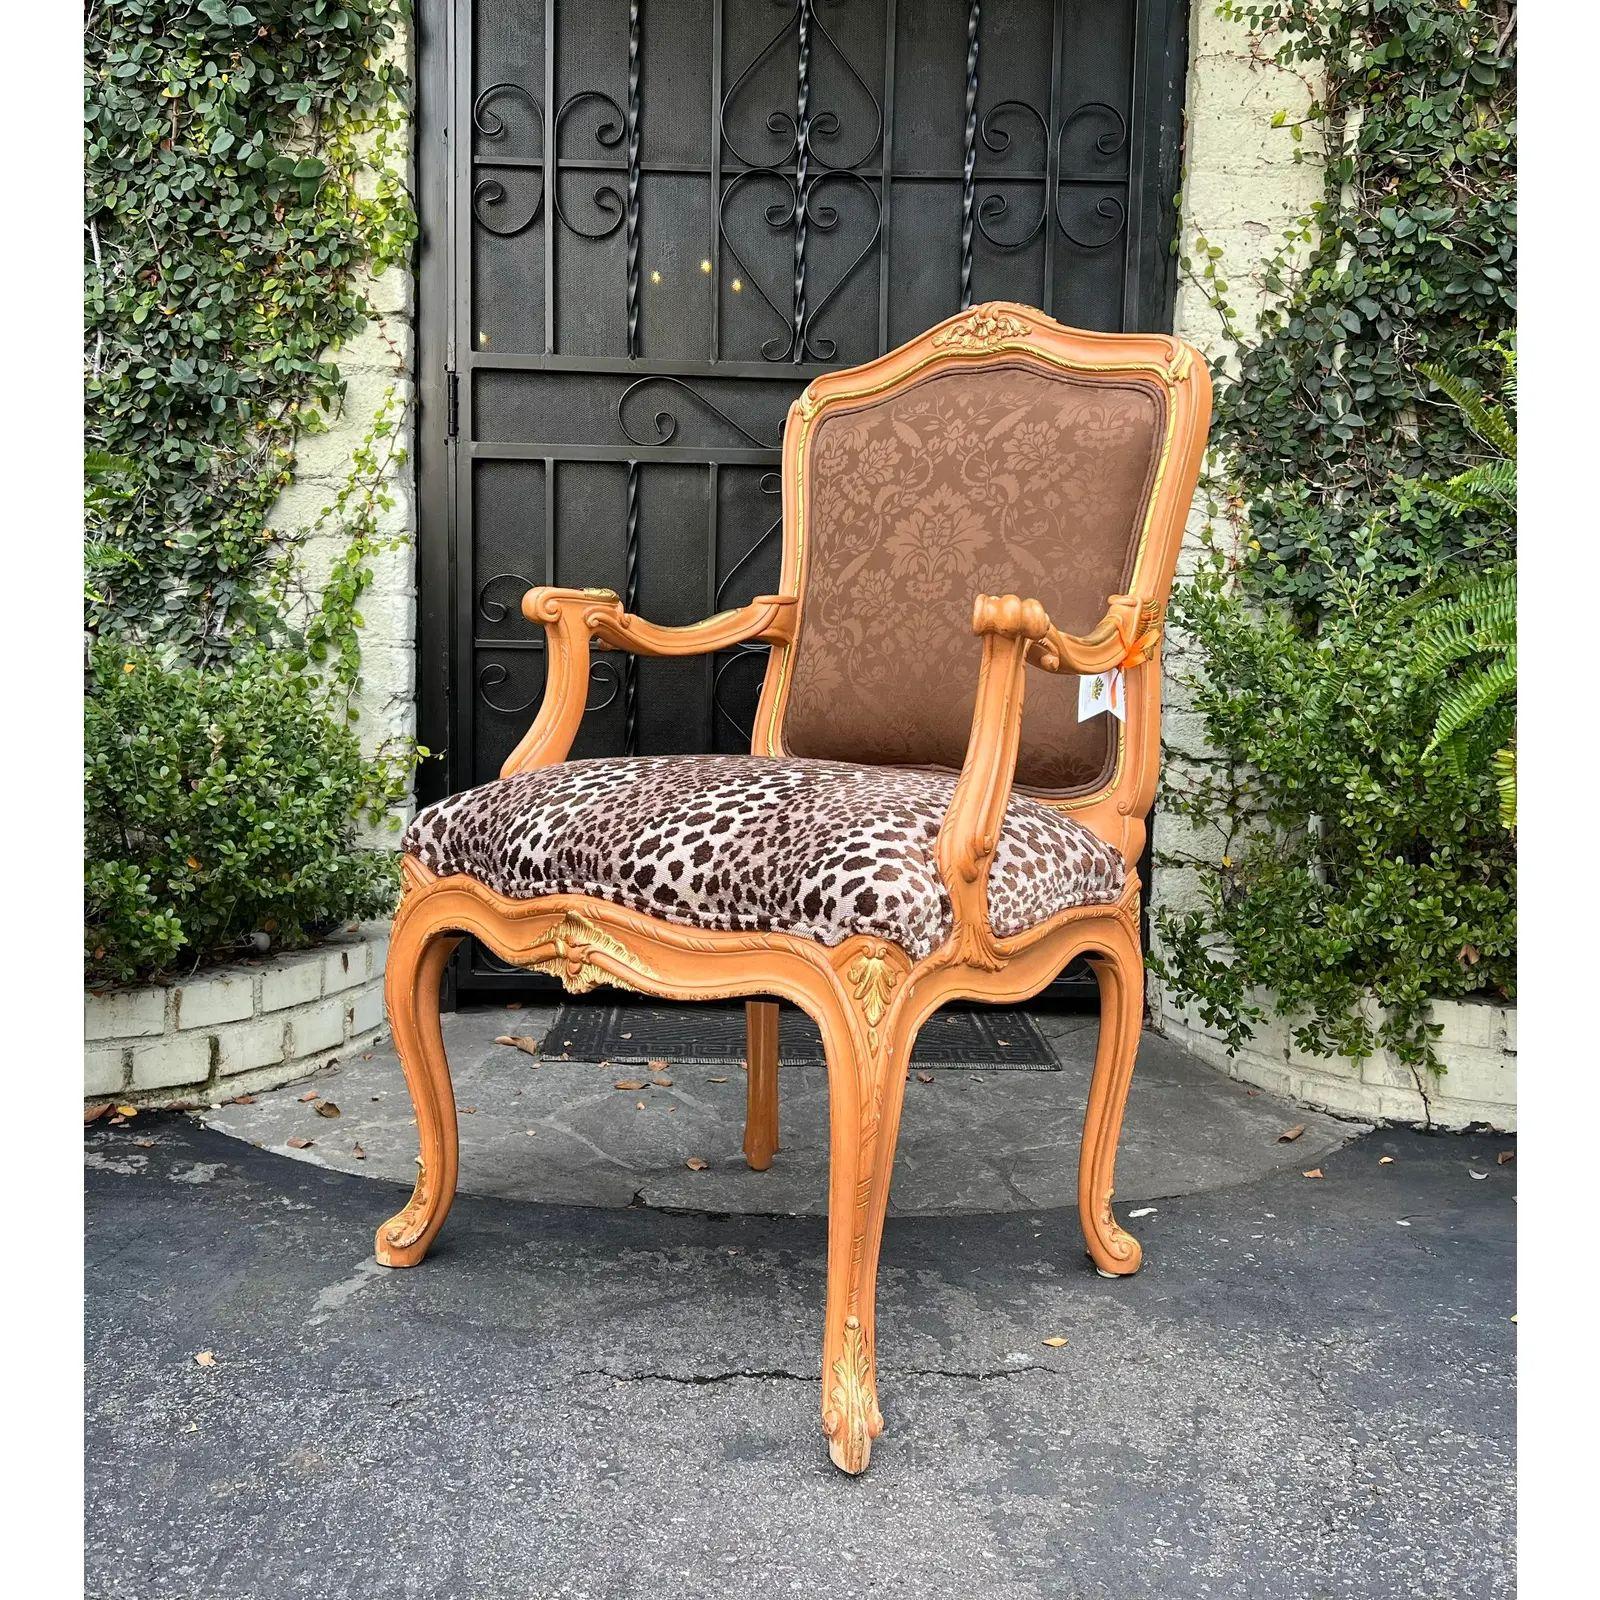 Priced each!
Louis XV Style Louis Mittman Fauteuil arm chairs. It features a combination of Scalamandre damask and Clarence House cut cheetah velvet upholstery. This listing is for 1 chair but we actually have 2 available.

Additional